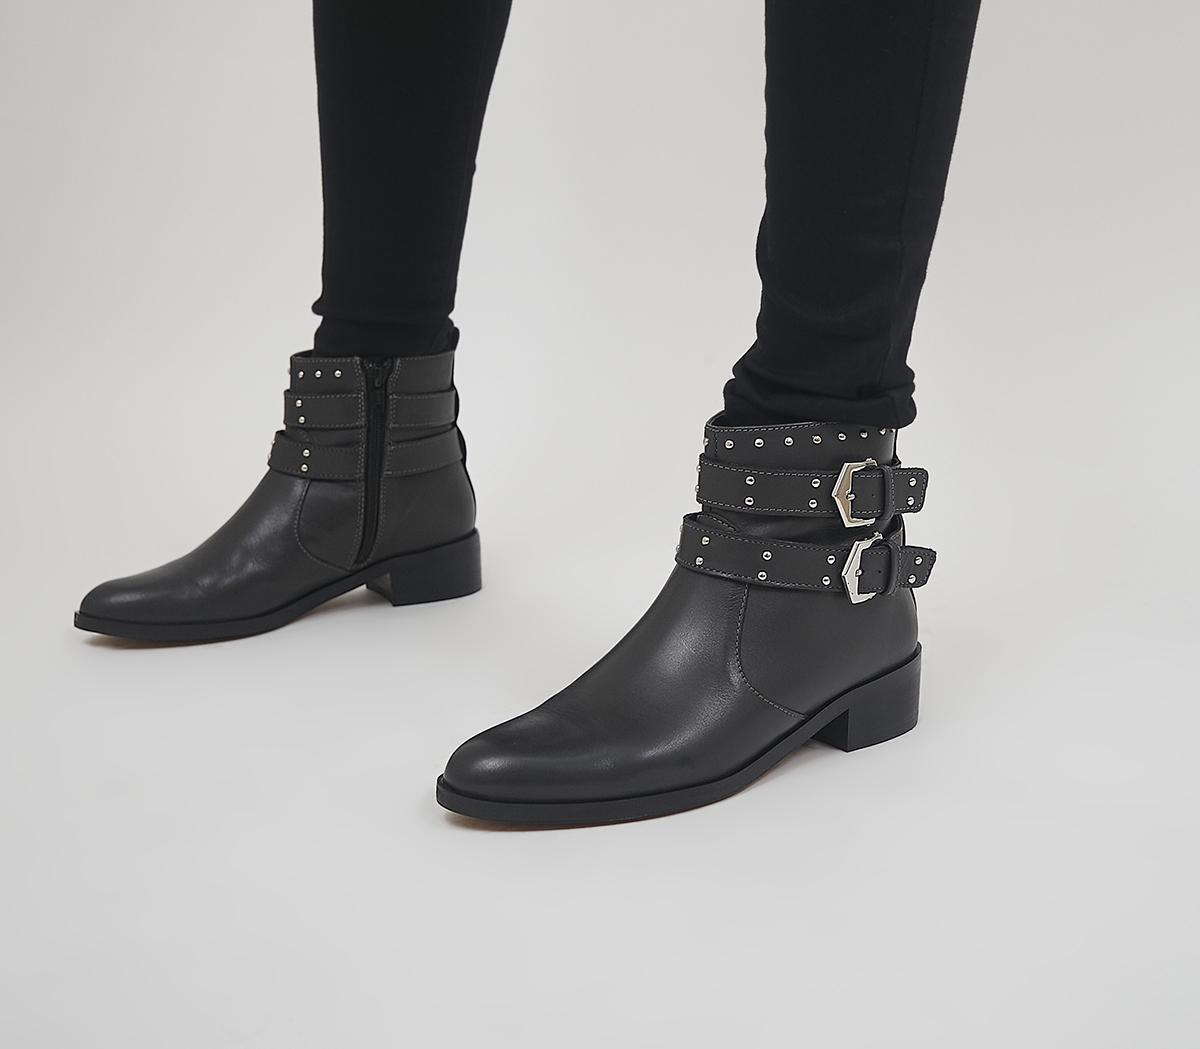 Anchor Double Buckle Studded Ankle Boots Dark Grey Leather